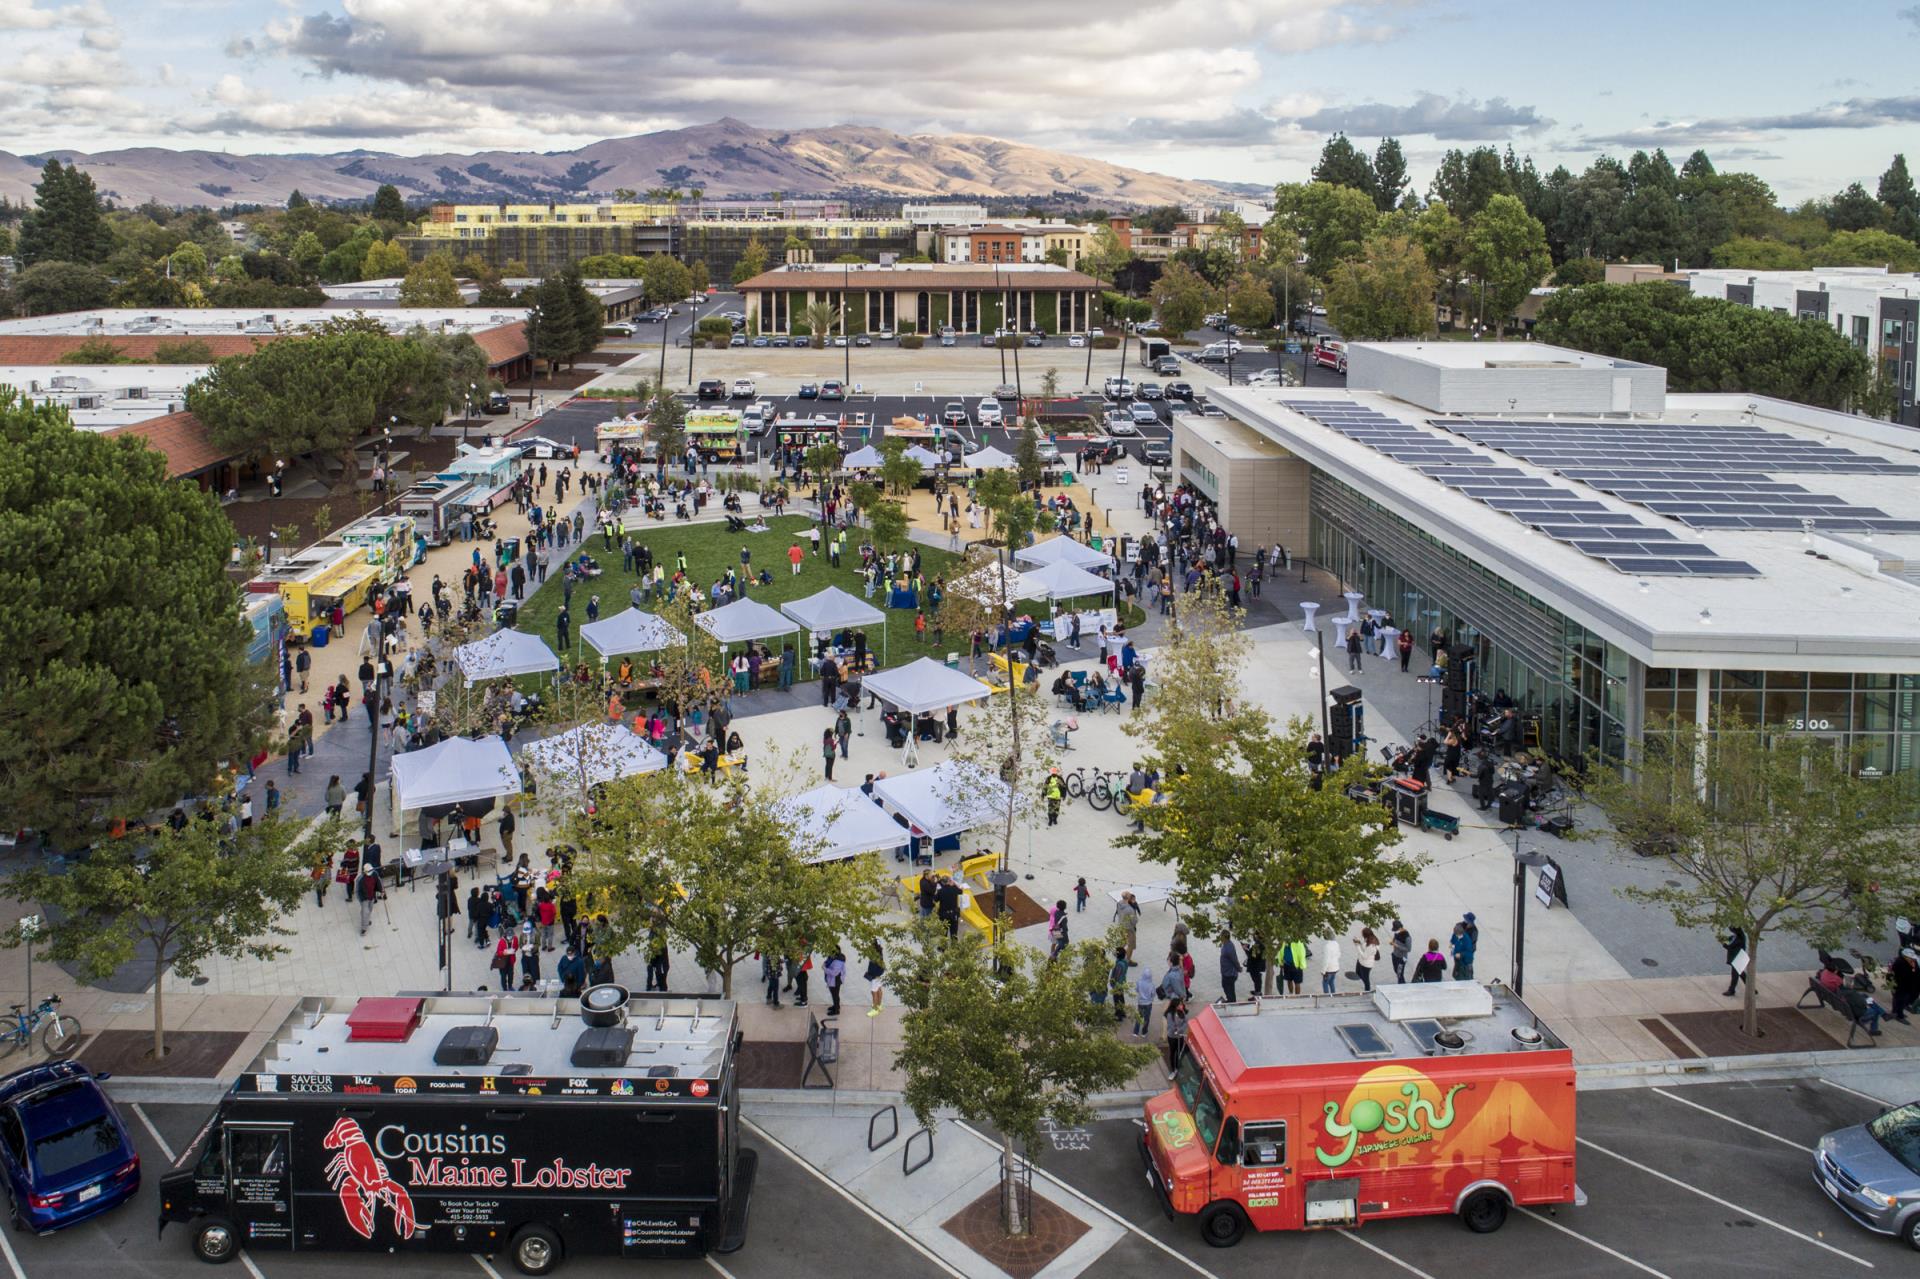 View of community gathering with food trucks and the Downtown event center including a roof full of solar panels with hills in the background